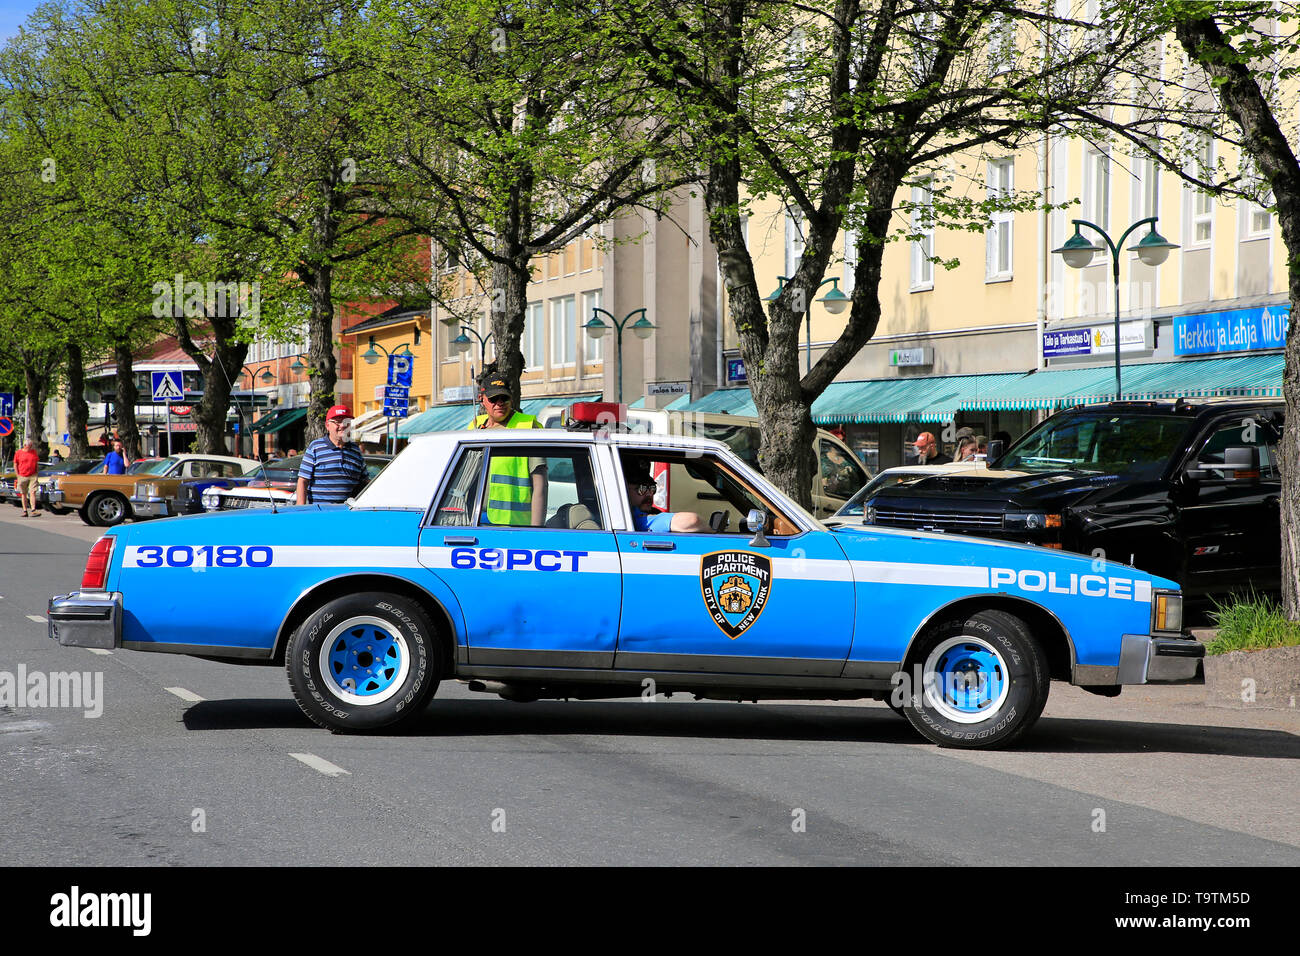 Salo; Finland. May 18; 2019. Late70s or early 80s Oldsmobile City of NY Police Department police car on the street. Salon Maisema Cruising 2019. Stock Photo